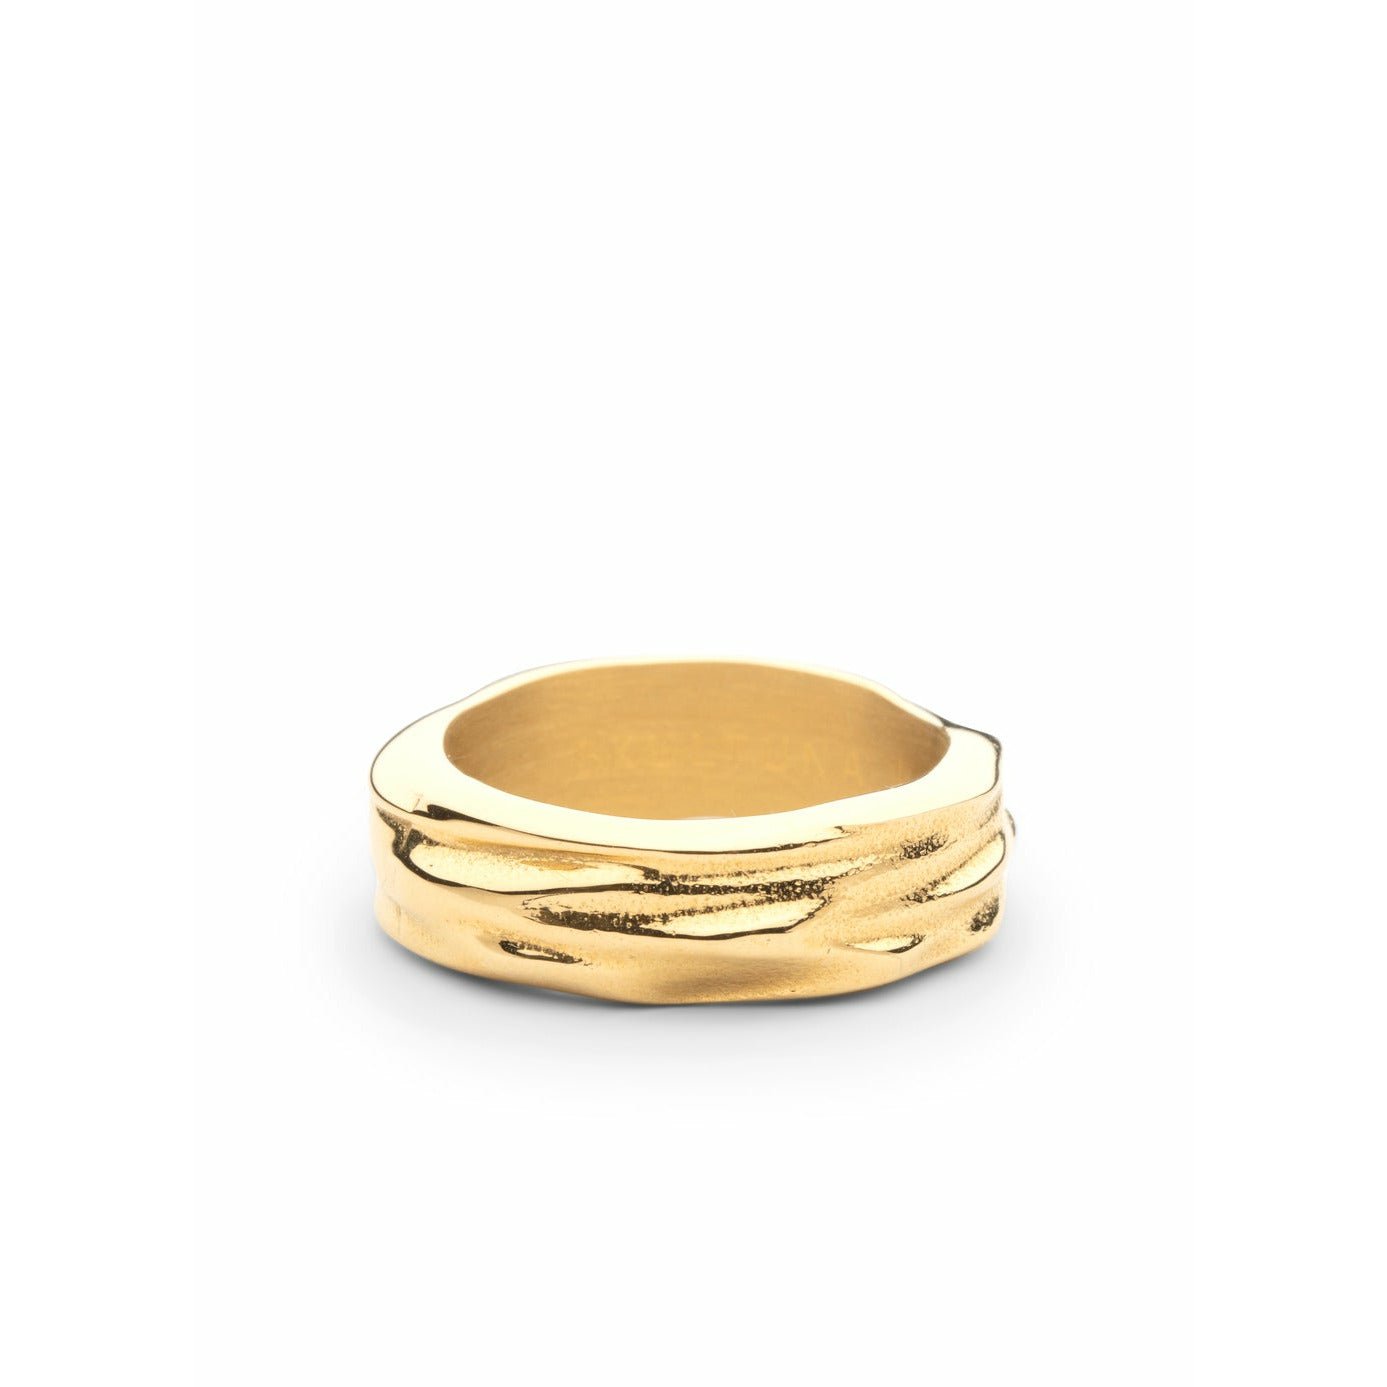 Skultuna Opaque Objects Thick Ring Lille Mat Guld, Ø1,6 cm